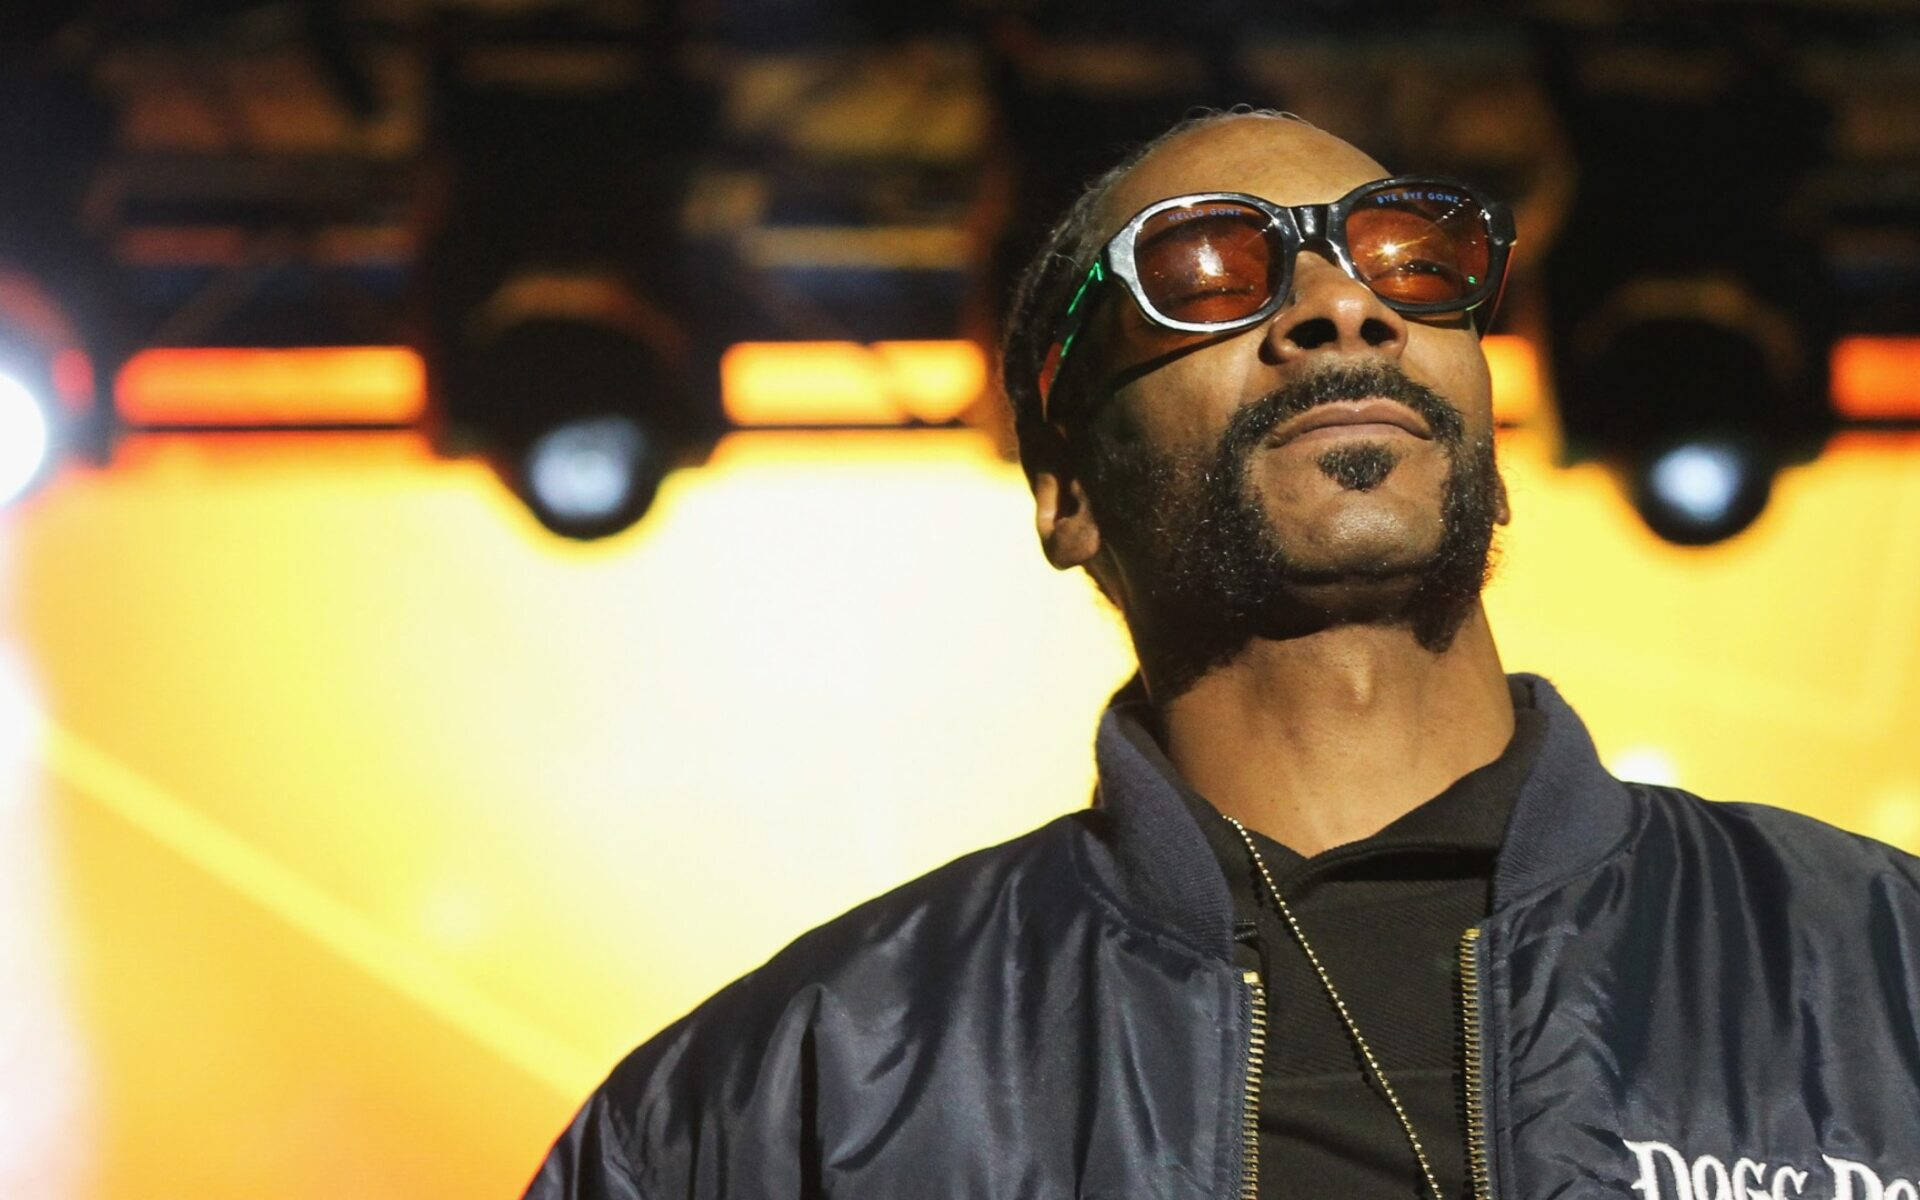 Snoop Dogg Live Performance Background